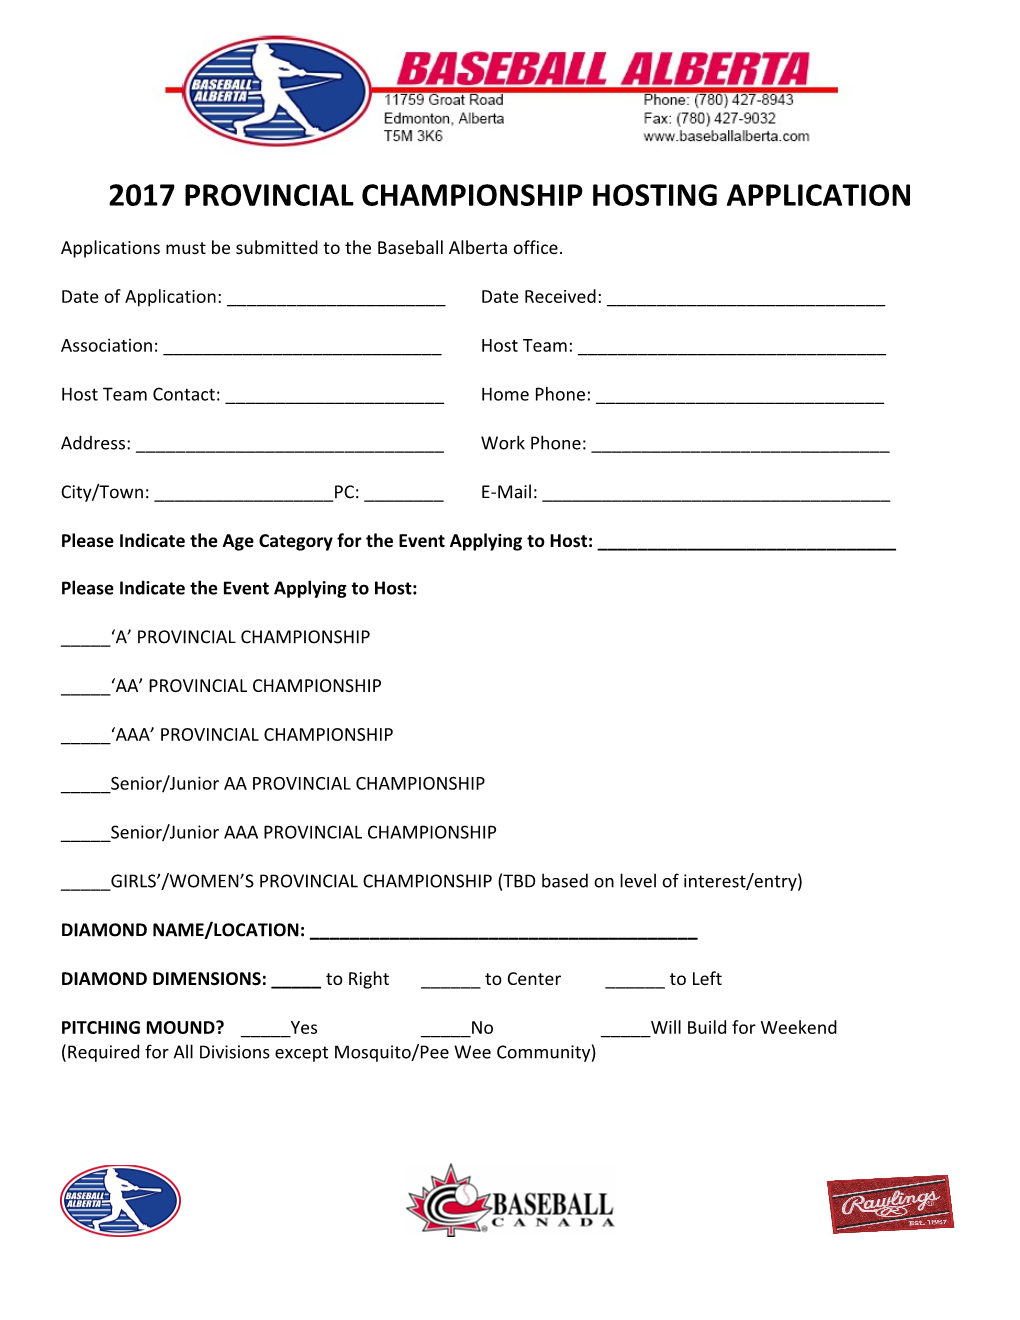 Round Robin/Provincial Host Application